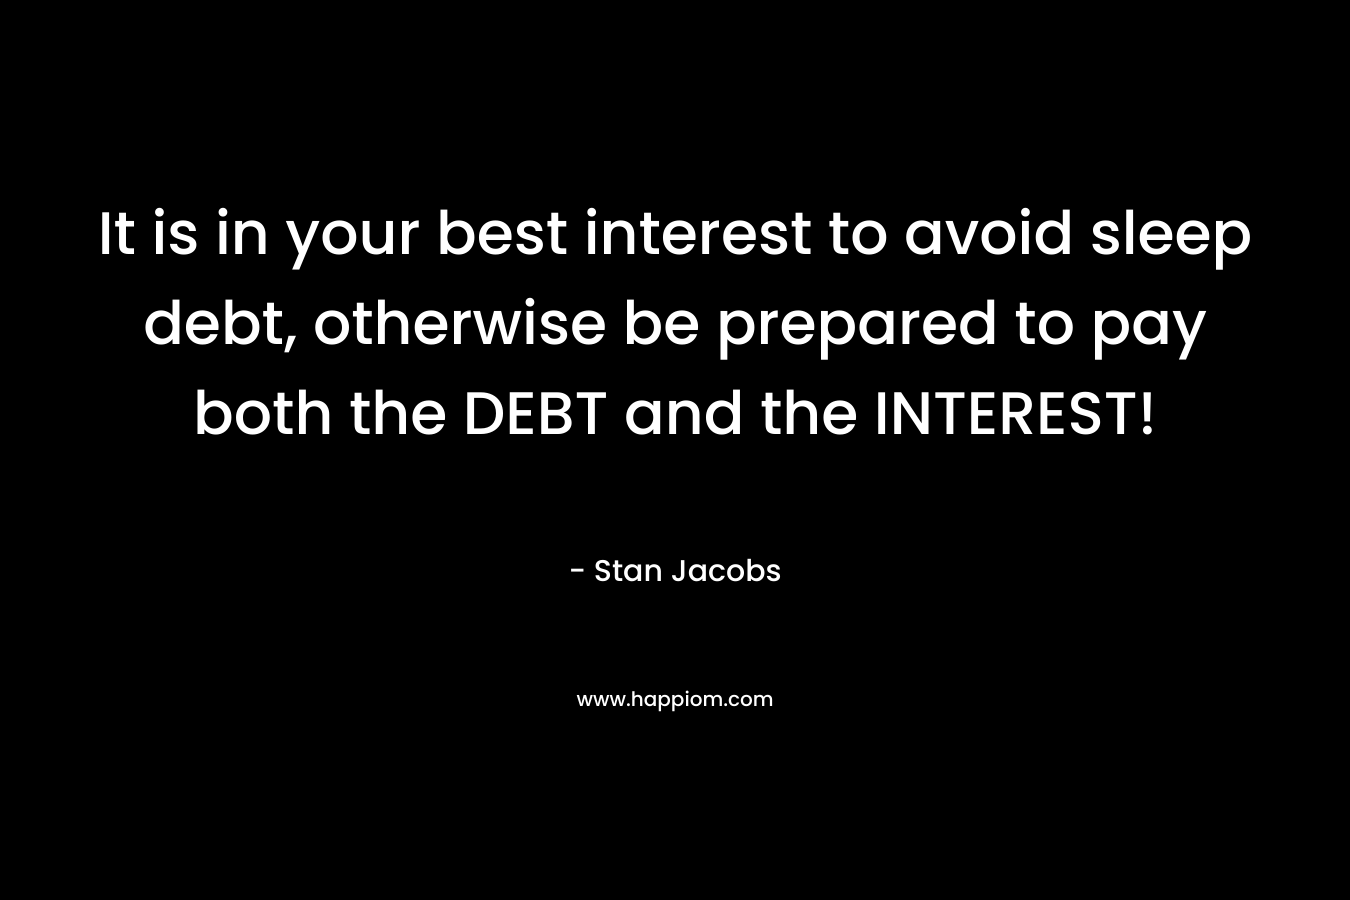 It is in your best interest to avoid sleep debt, otherwise be prepared to pay both the DEBT and the INTEREST! – Stan Jacobs